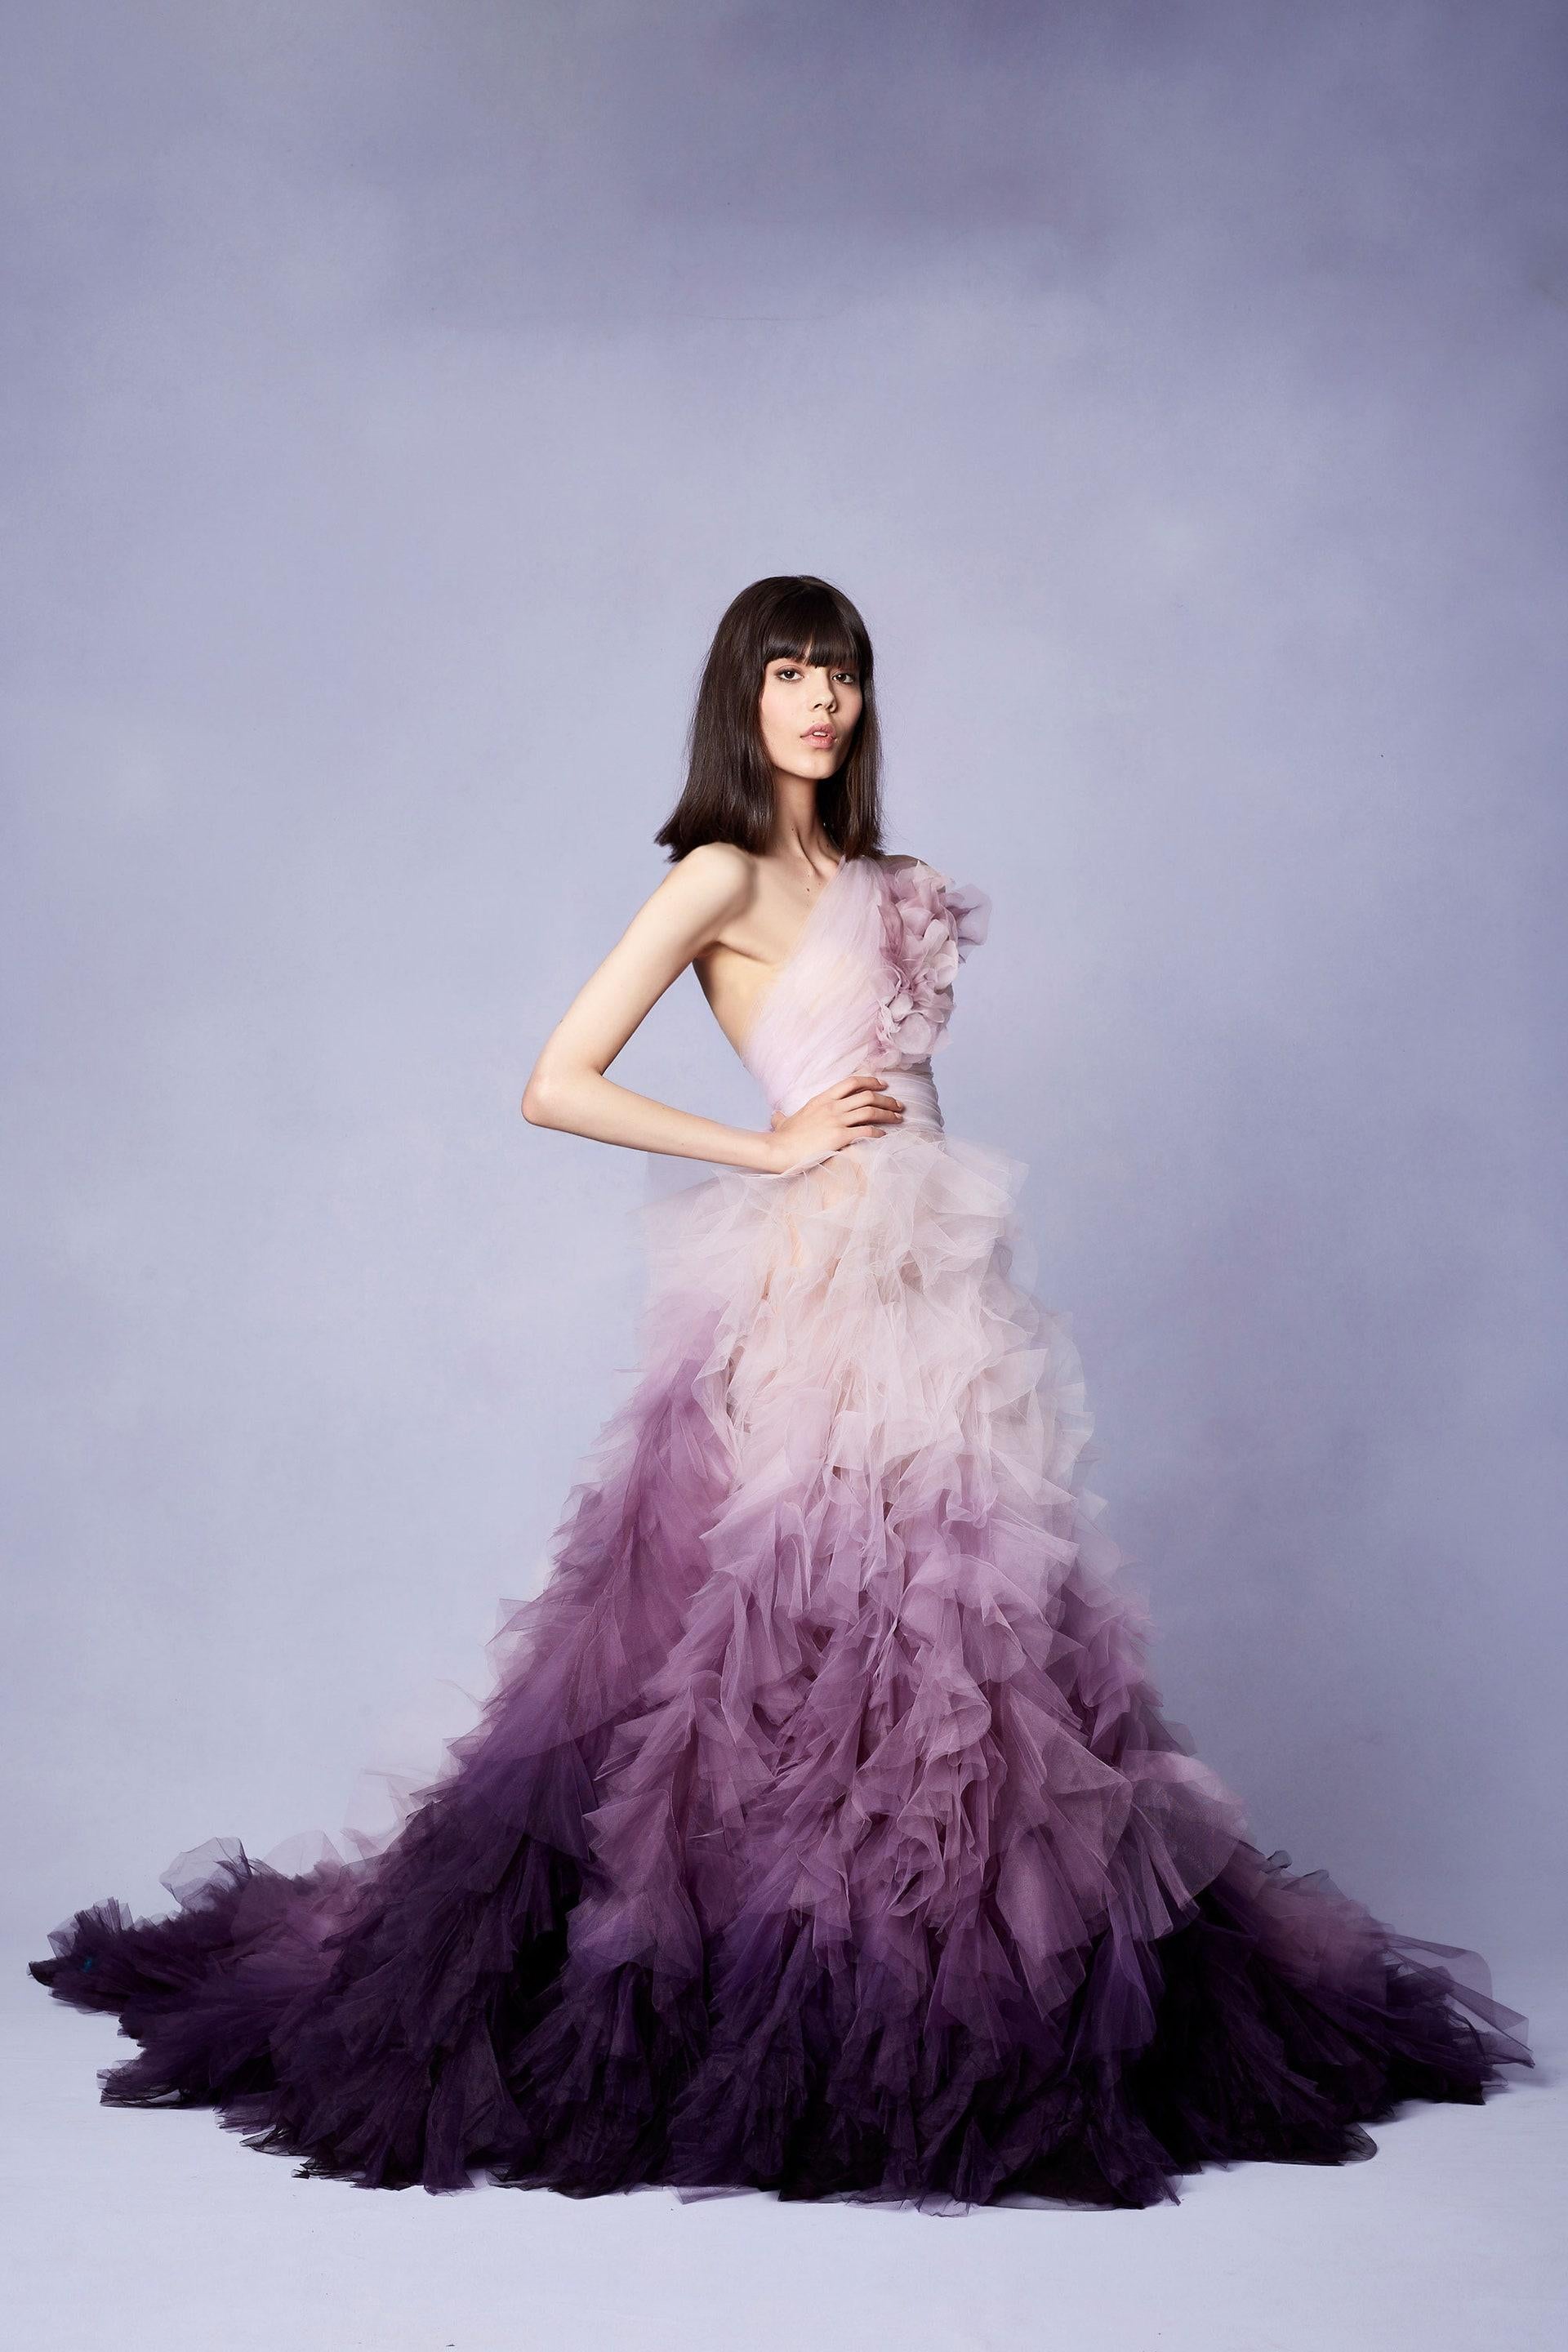 MARCHESA Lilac One-shoulder Floral-appliquéd Tulle Gown
Year Made: 2018
Content: Tulle

Size EU 40 - 4

Pre owned in excellent condition
100% authentic guarantee 

PLEASE VISIT OUR STORE FOR MORE GREAT ITEMS 
